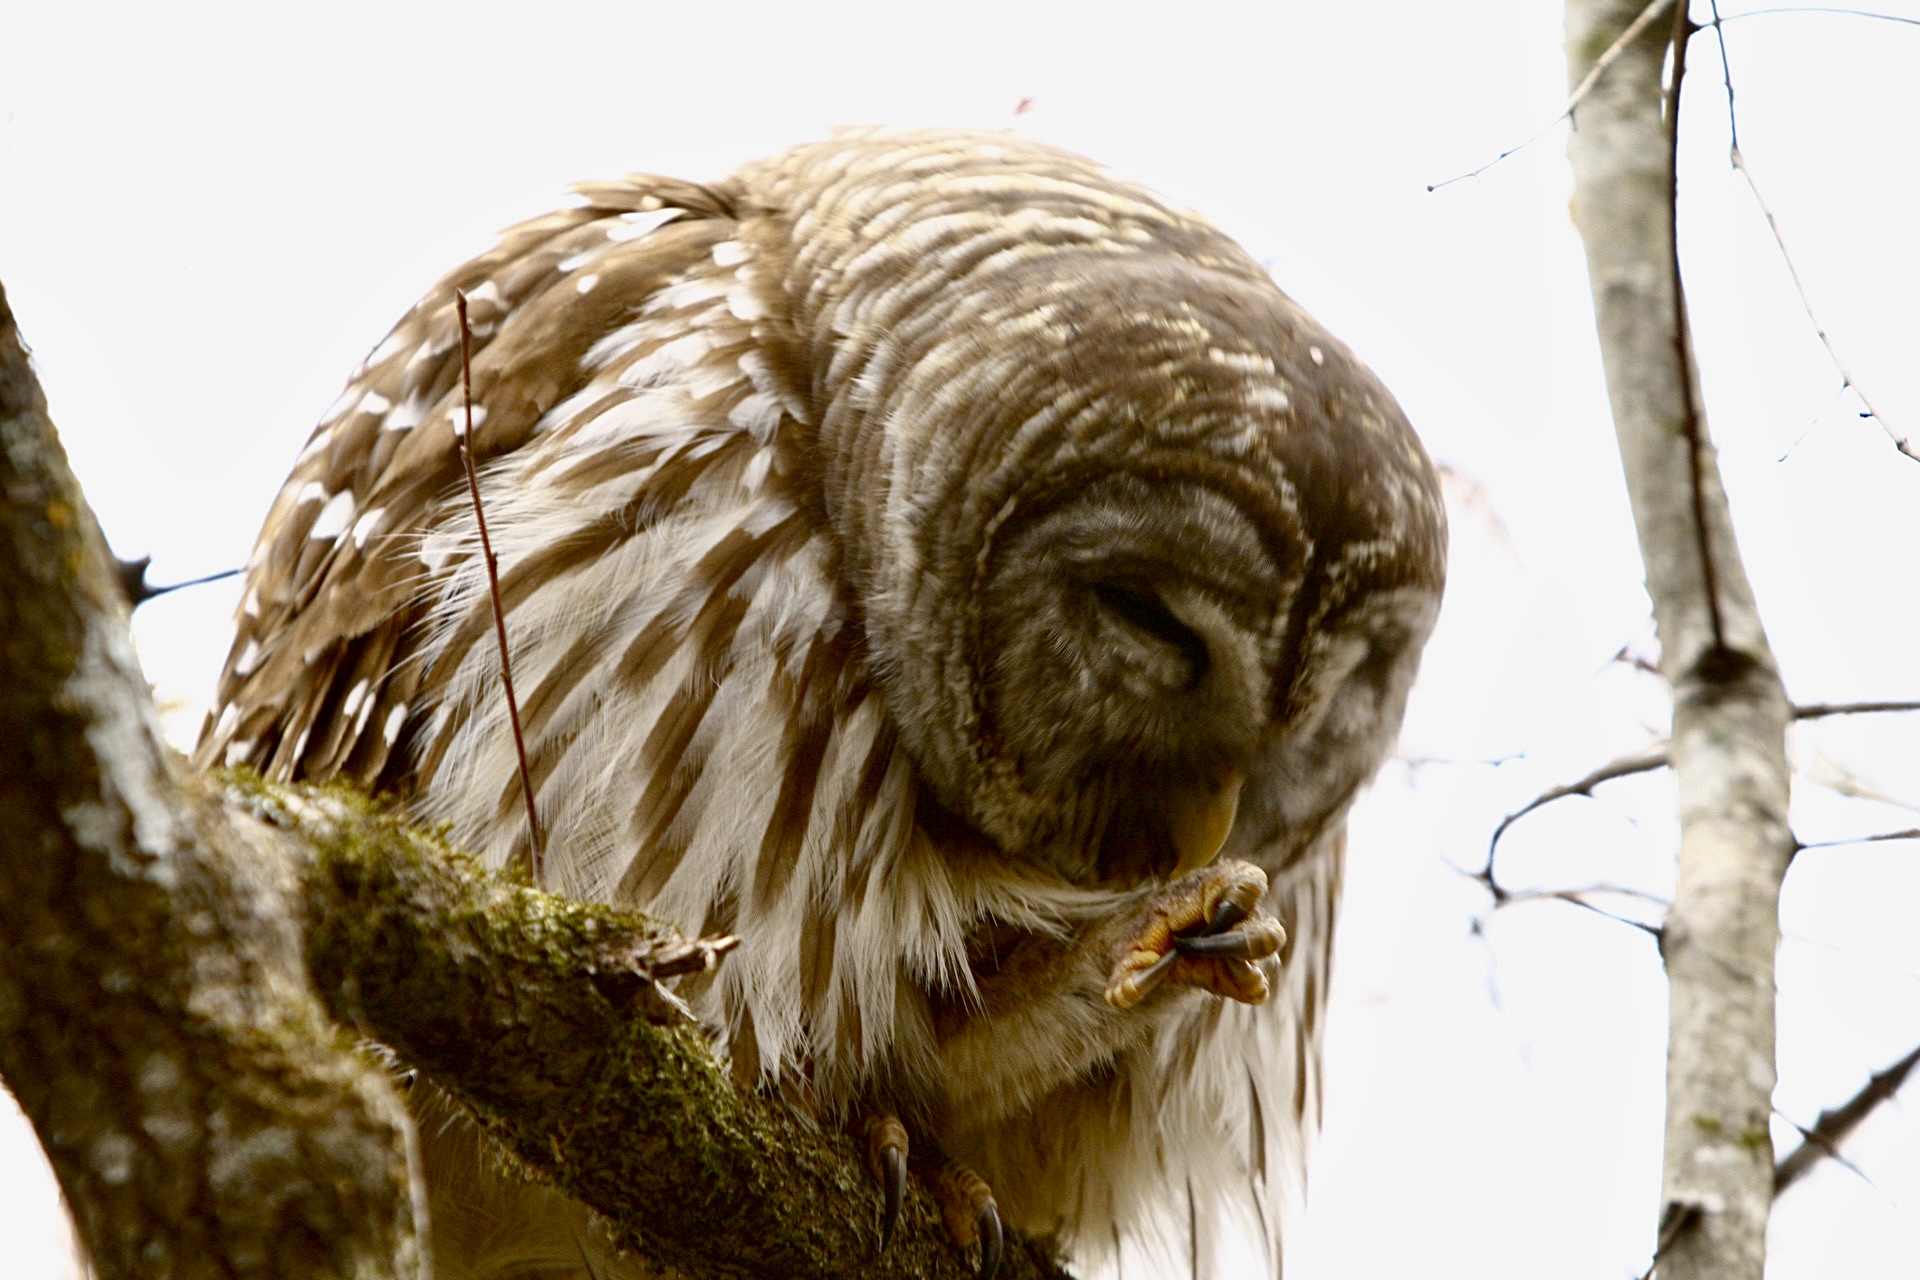 "The full-bodied Barred owl is parti-striped in brown and white. The owl perches on the right foot, and cocks up the left foot with a gnarled claw. It leans its head forward to preen the left leg feathers."